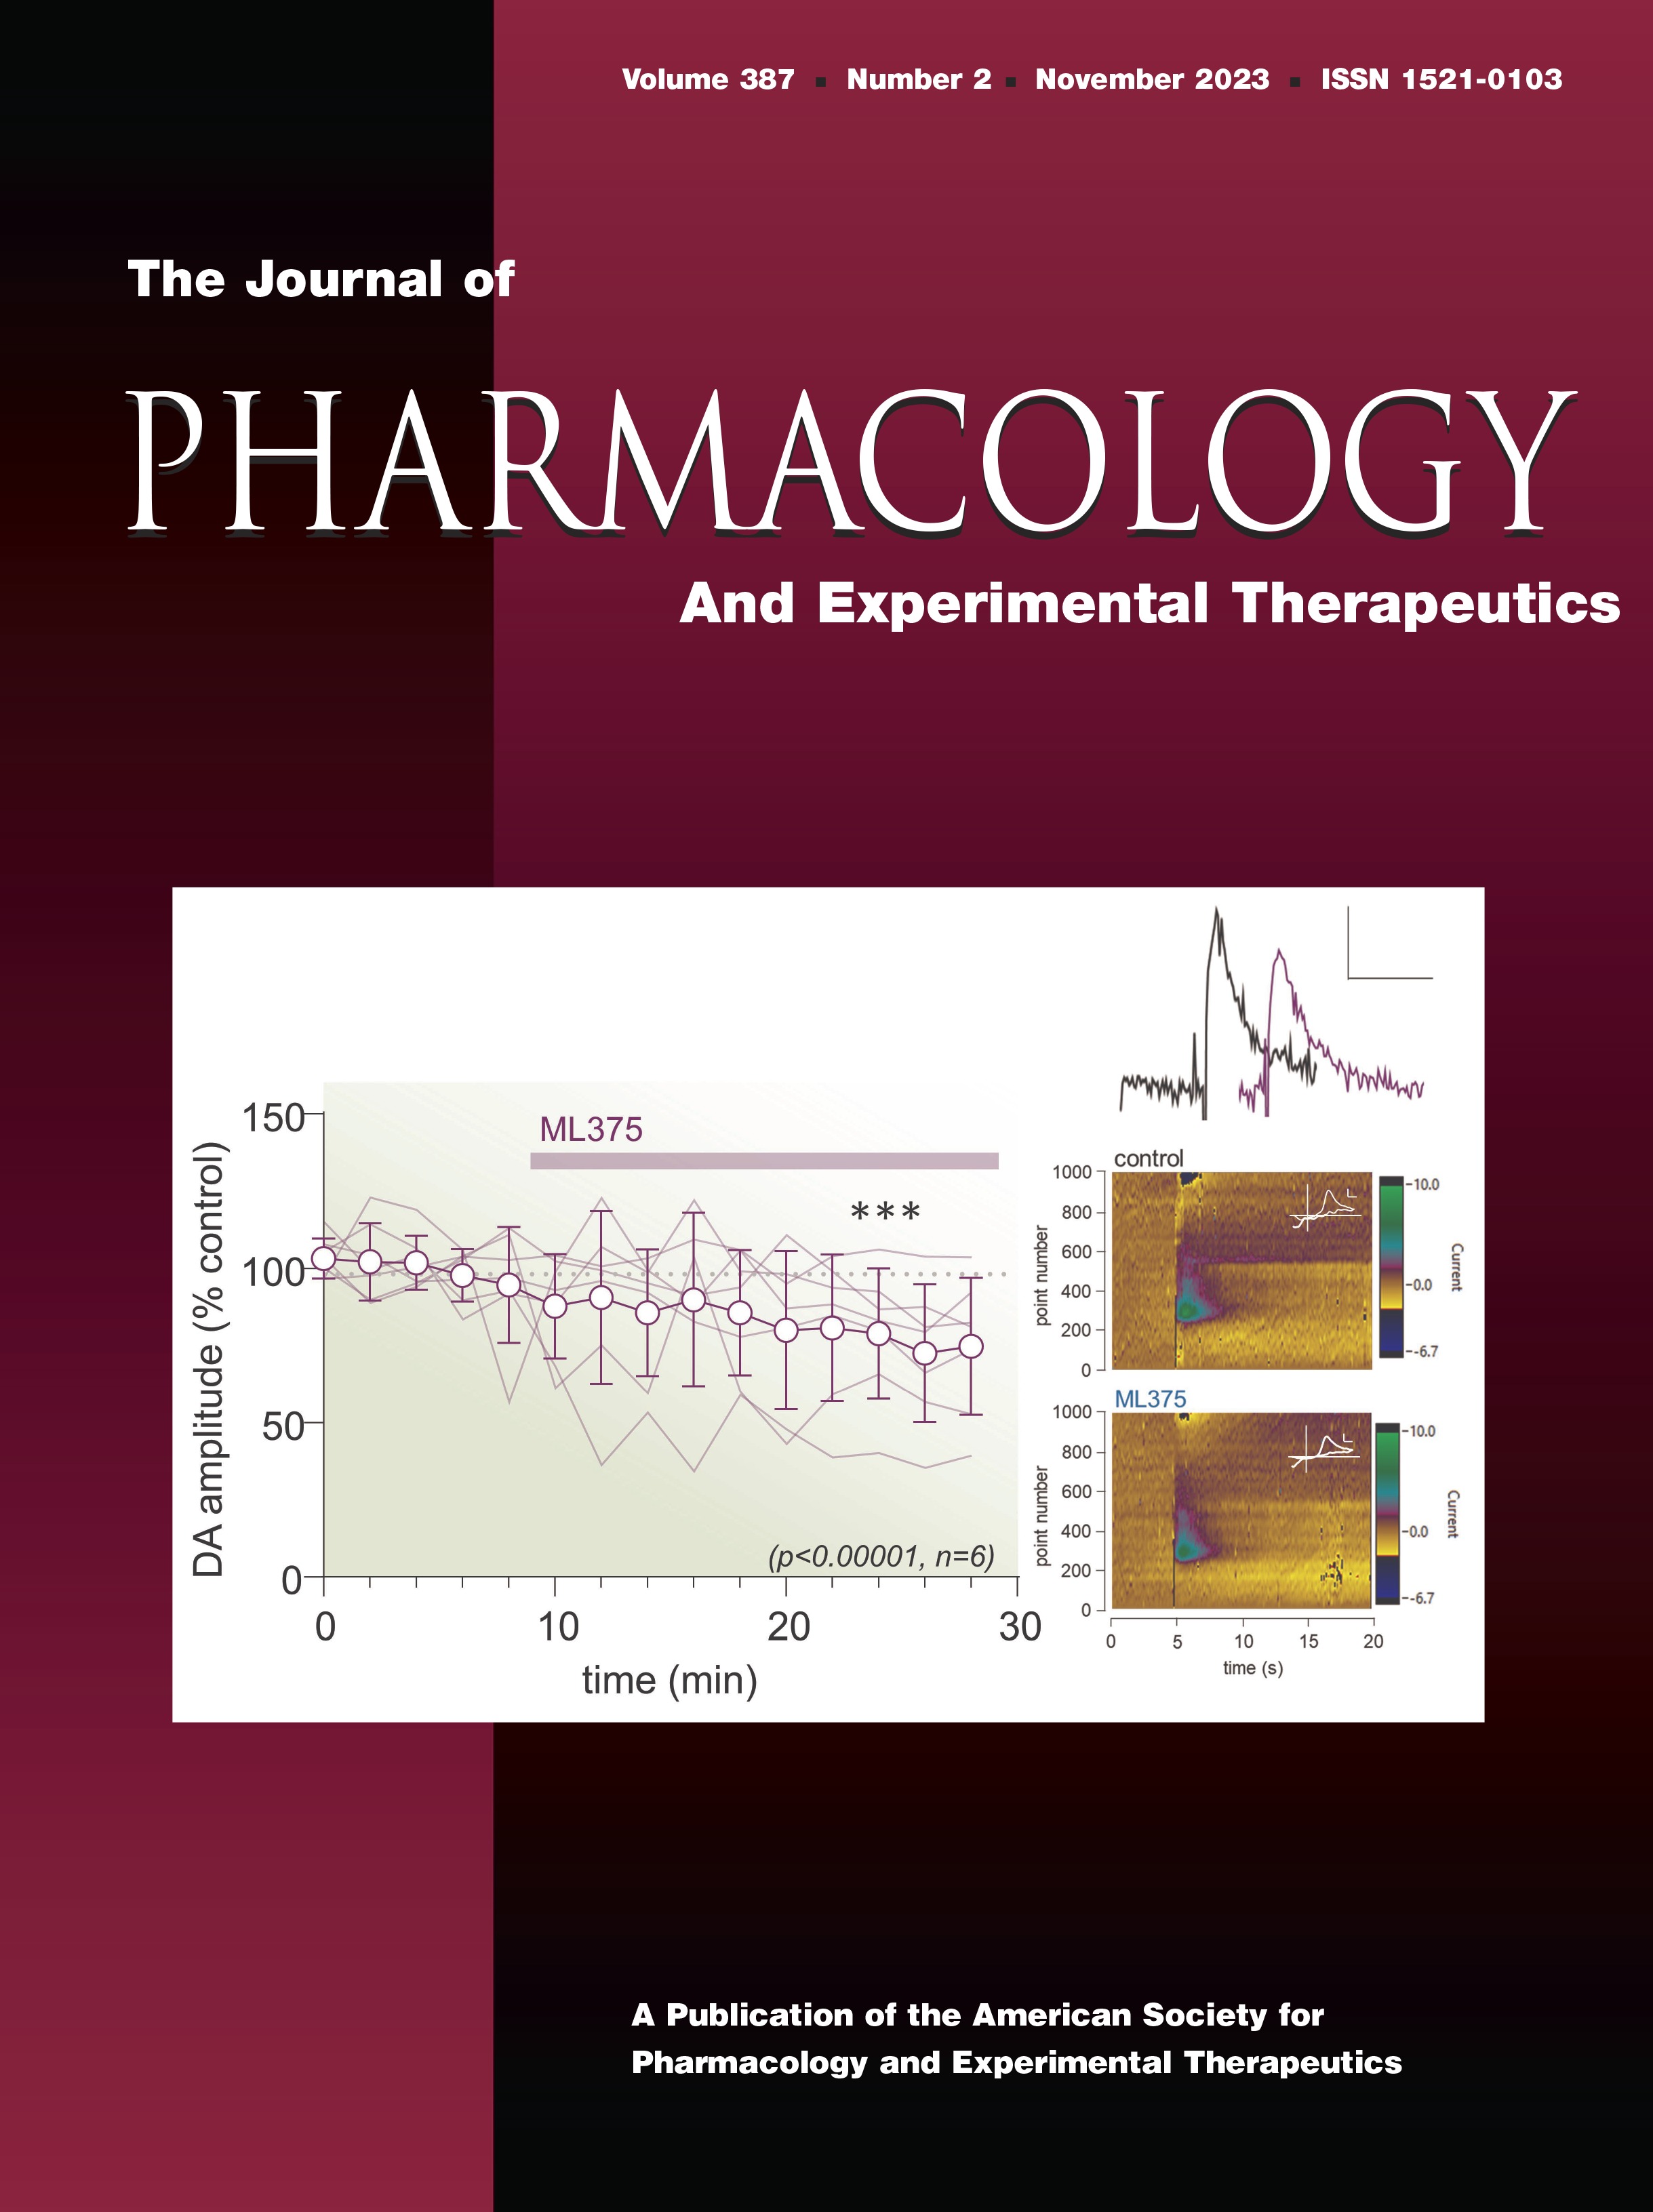 Characterization of Selective M5 Acetylcholine Muscarinic Receptor Modulators on Dopamine Signaling in the Striatum [Neuropharmacology]